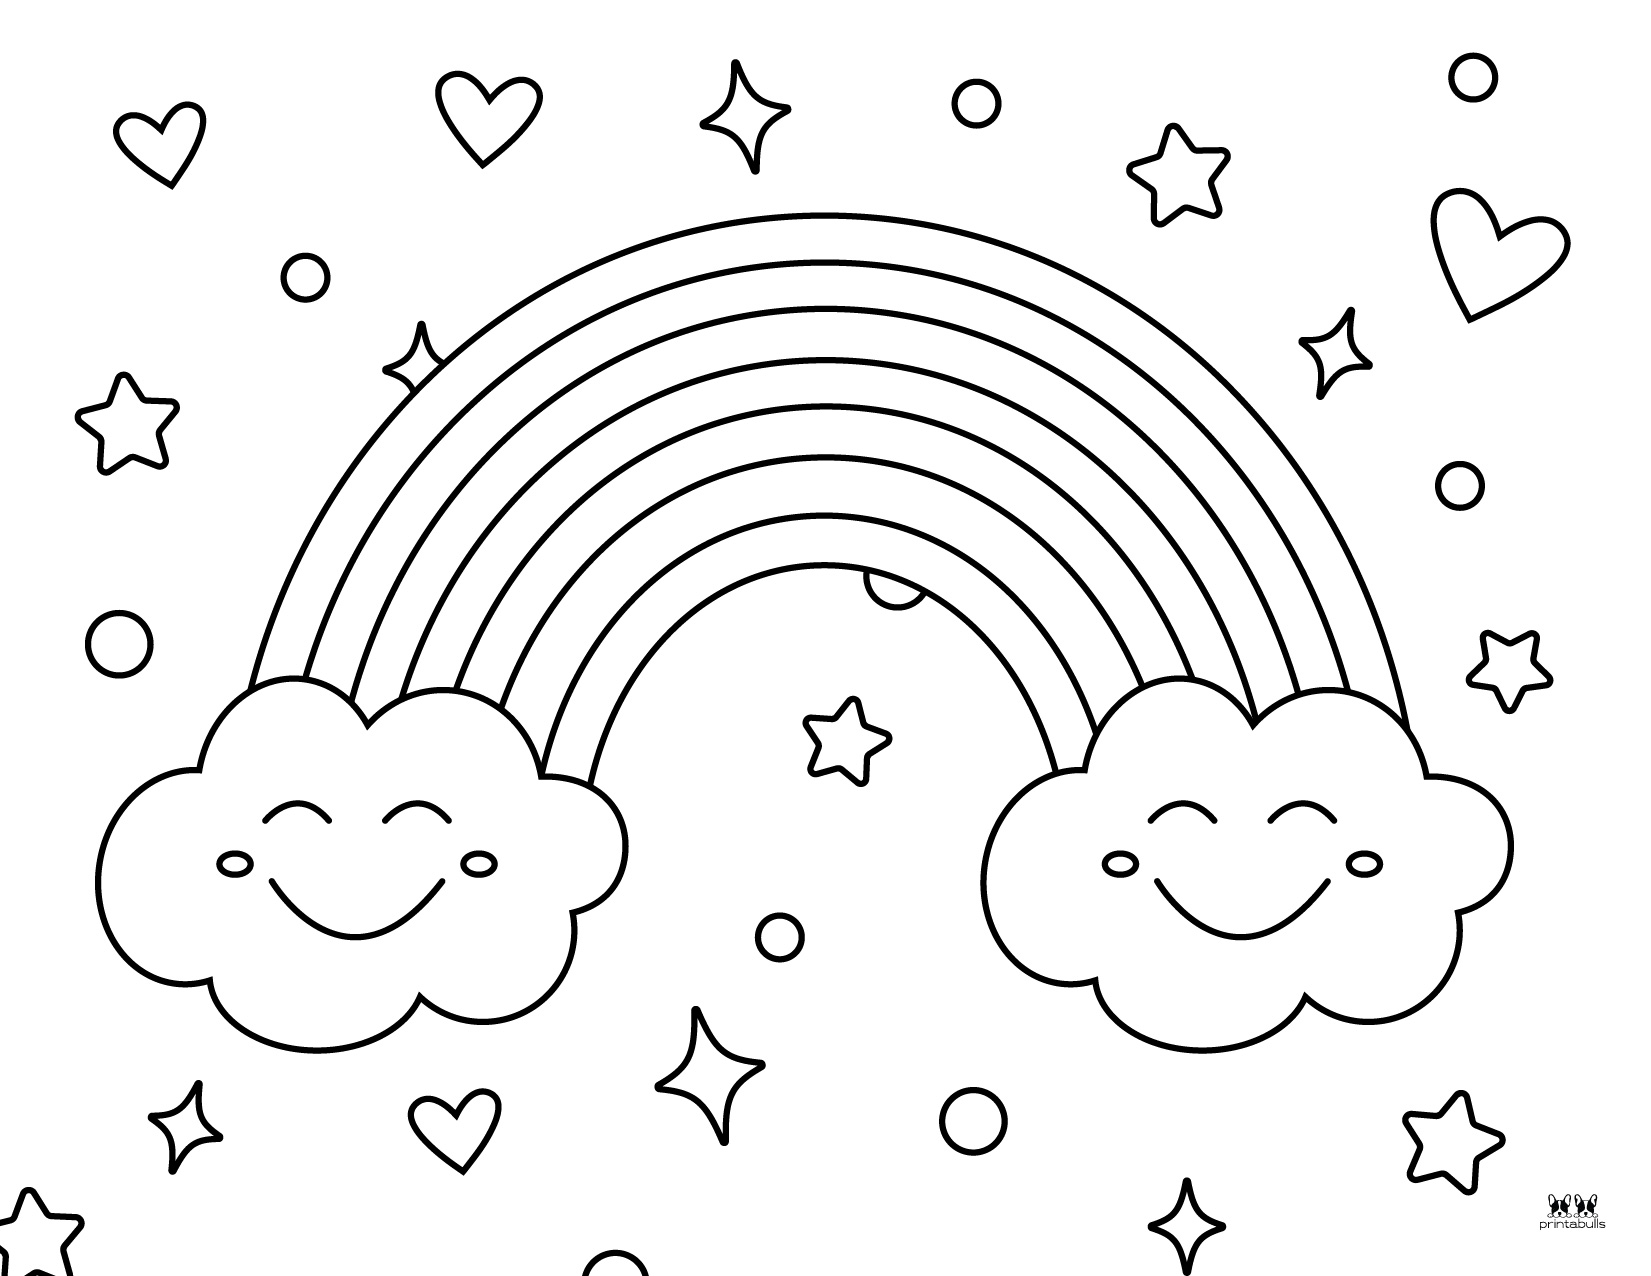 free printable rainbow coloring pages for kids - free printable rainbow ...